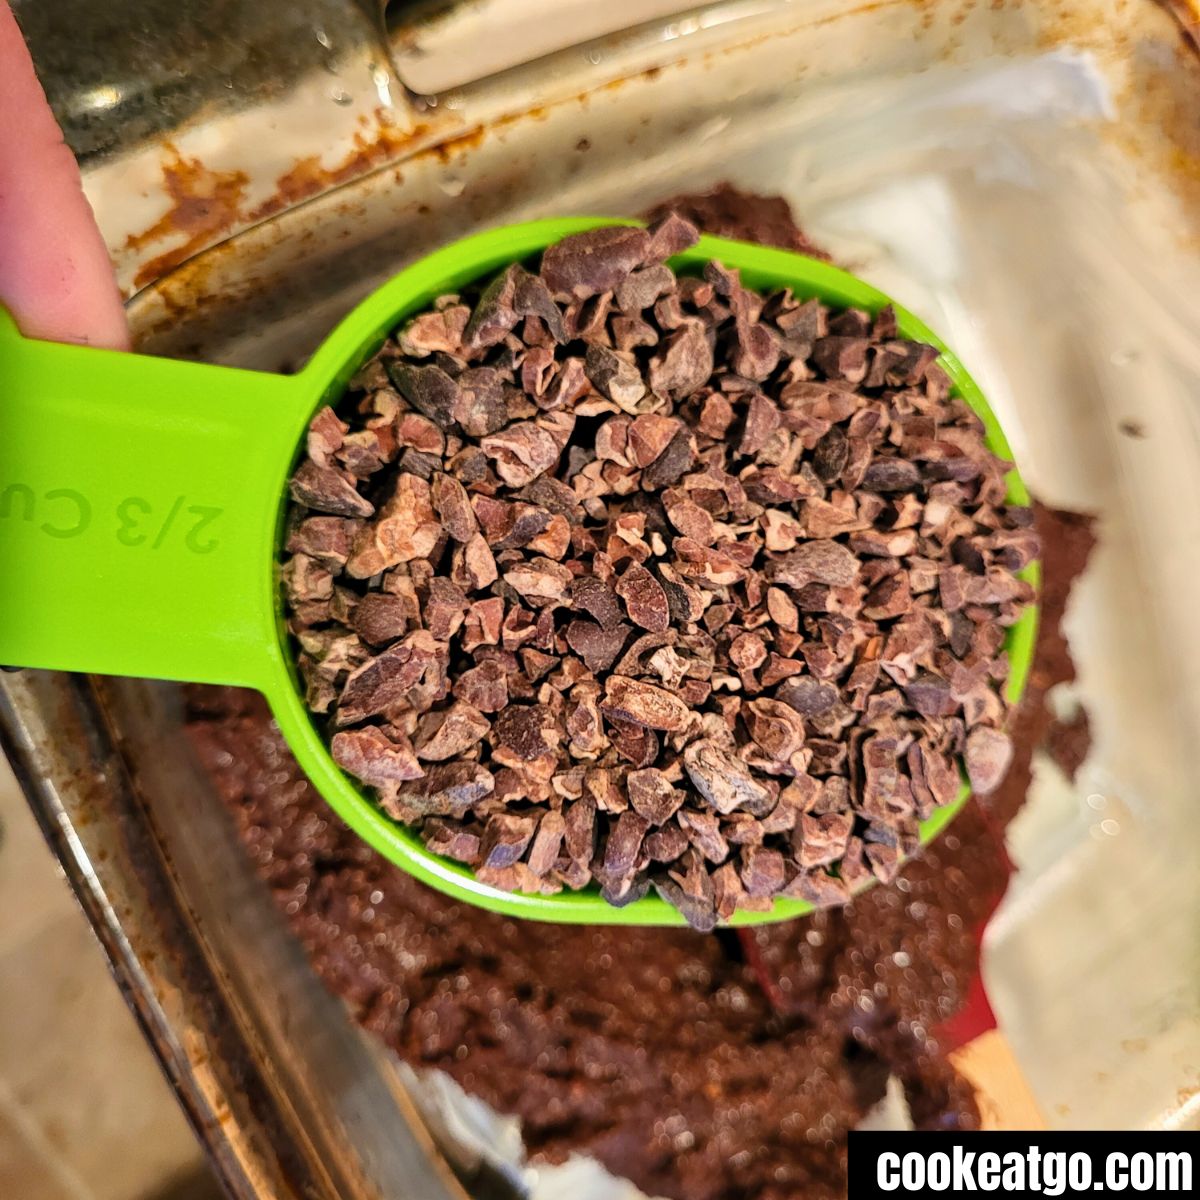 Measuring cup of viva naturals cacao nibs over black bean brownie in 8x8 pyrex pan